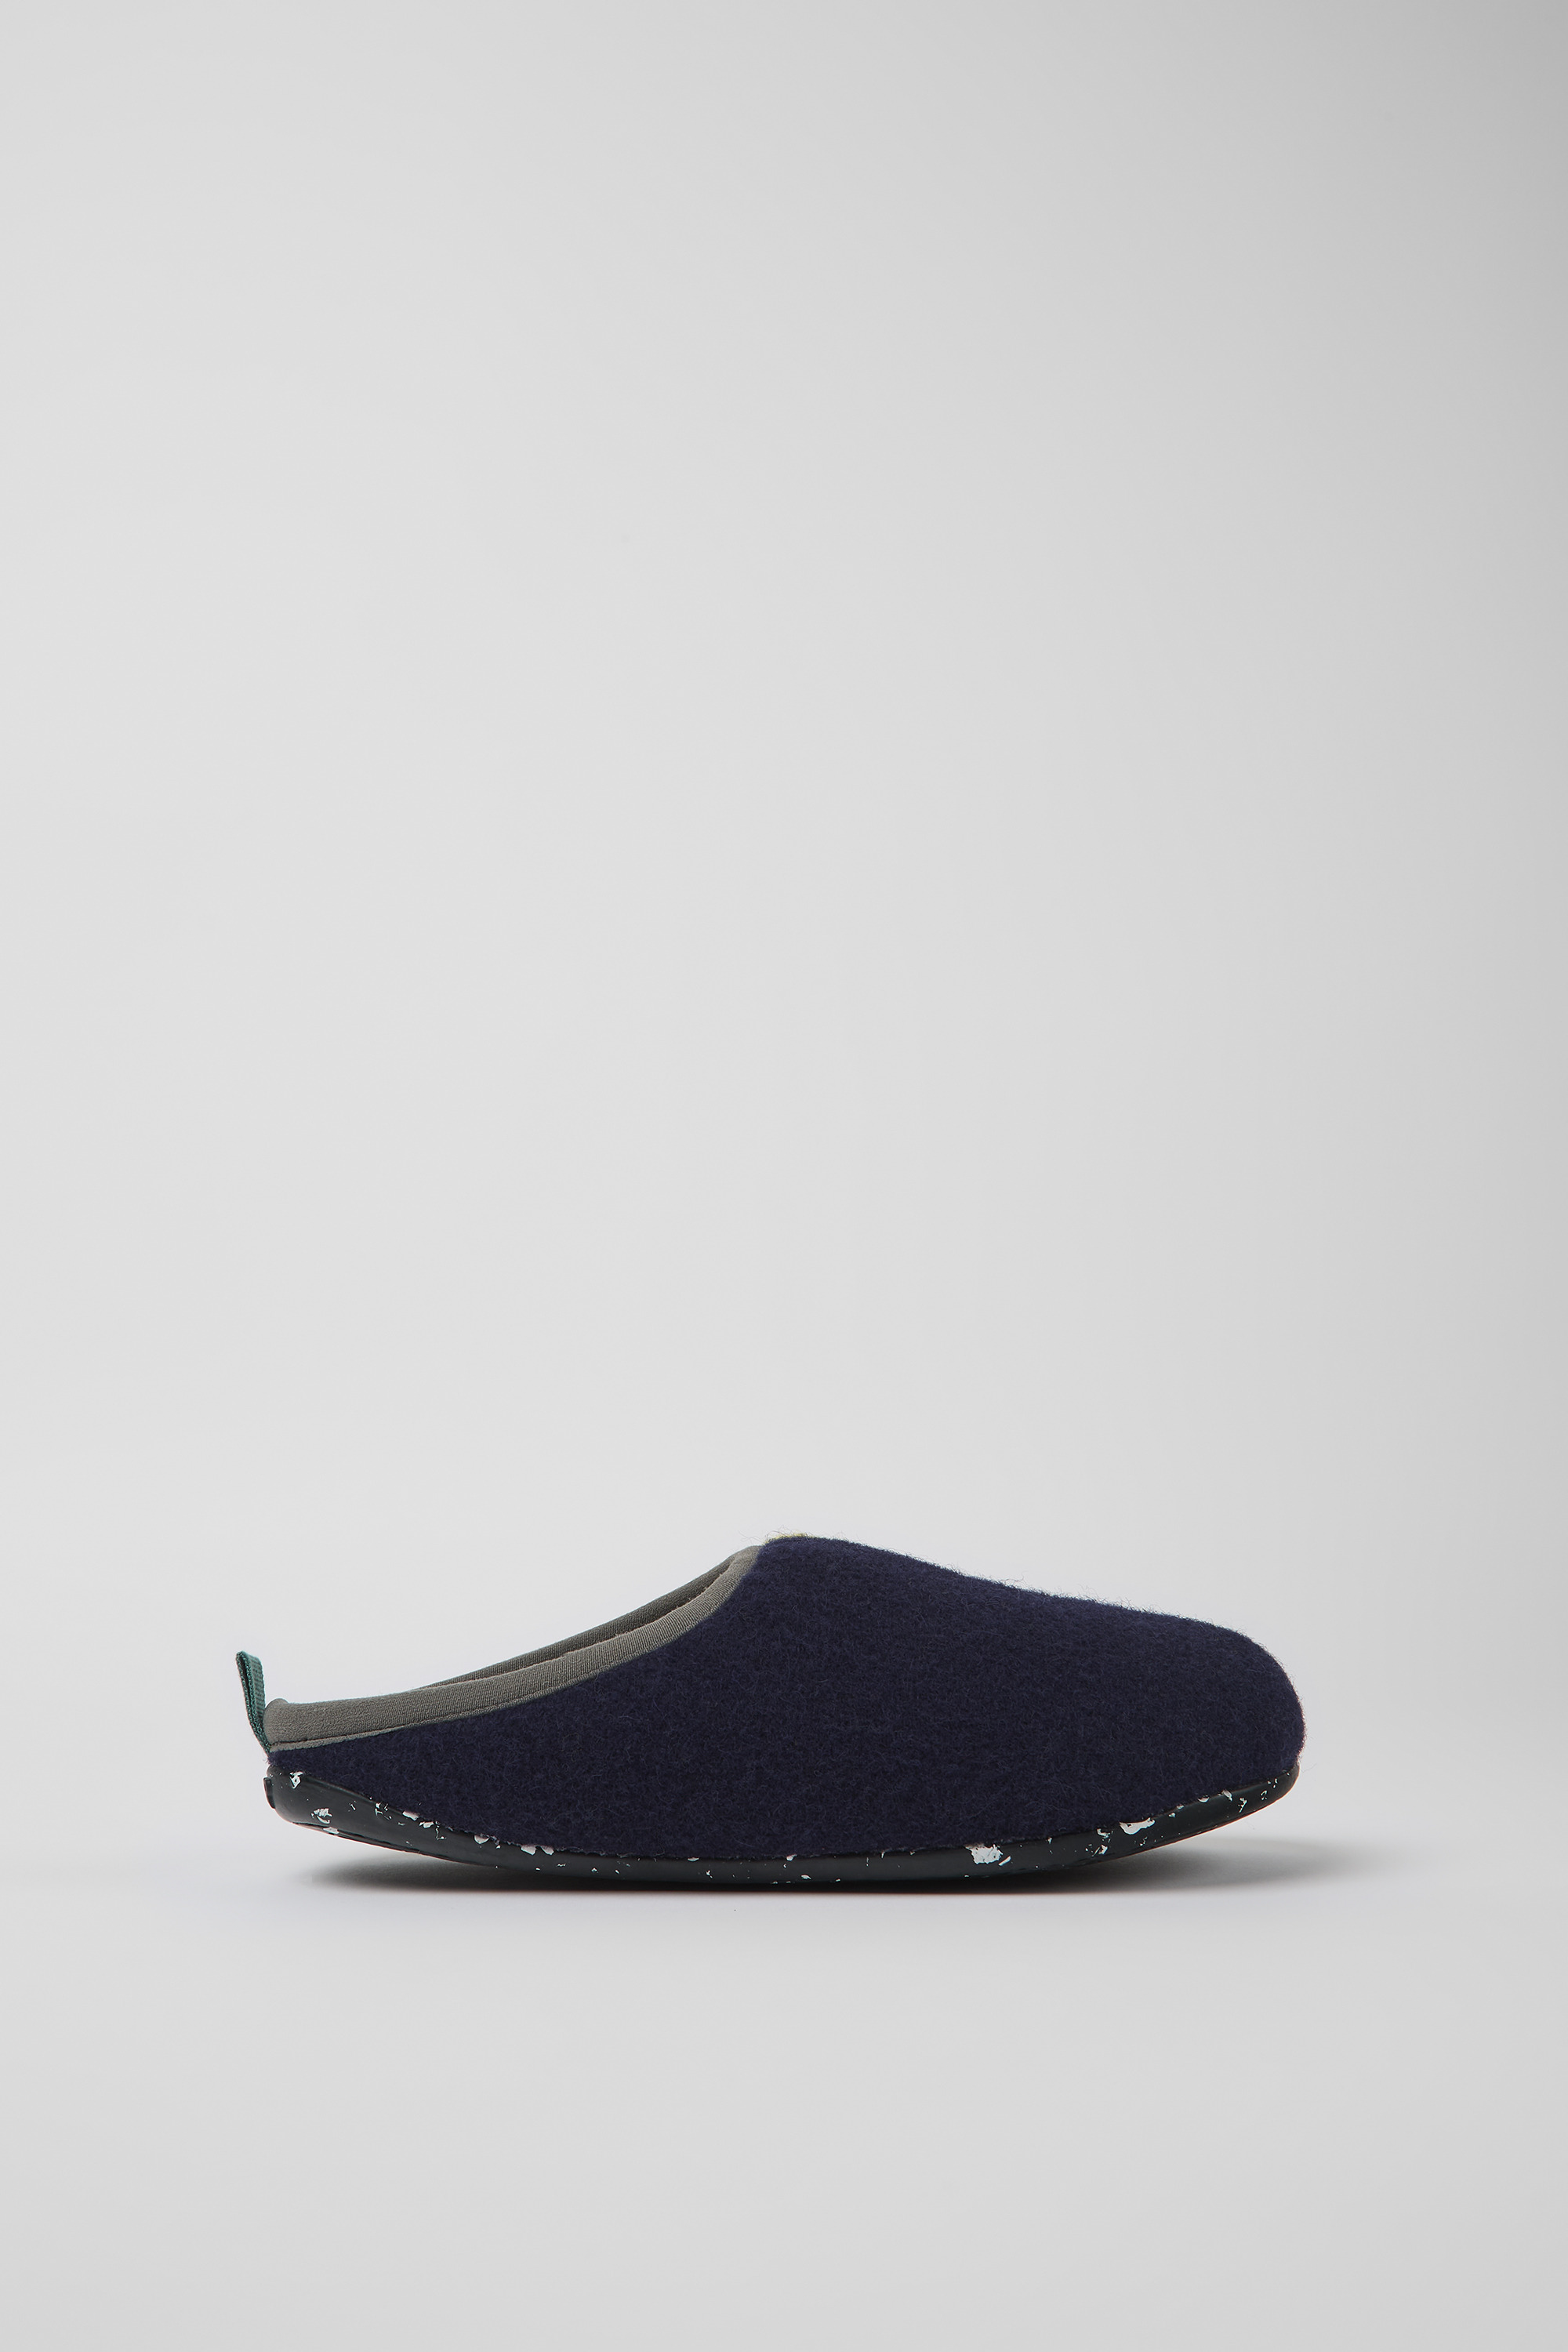 Mob data regardless of Twins Multicolor Slippers for Women - Fall/Winter collection - Camper USA